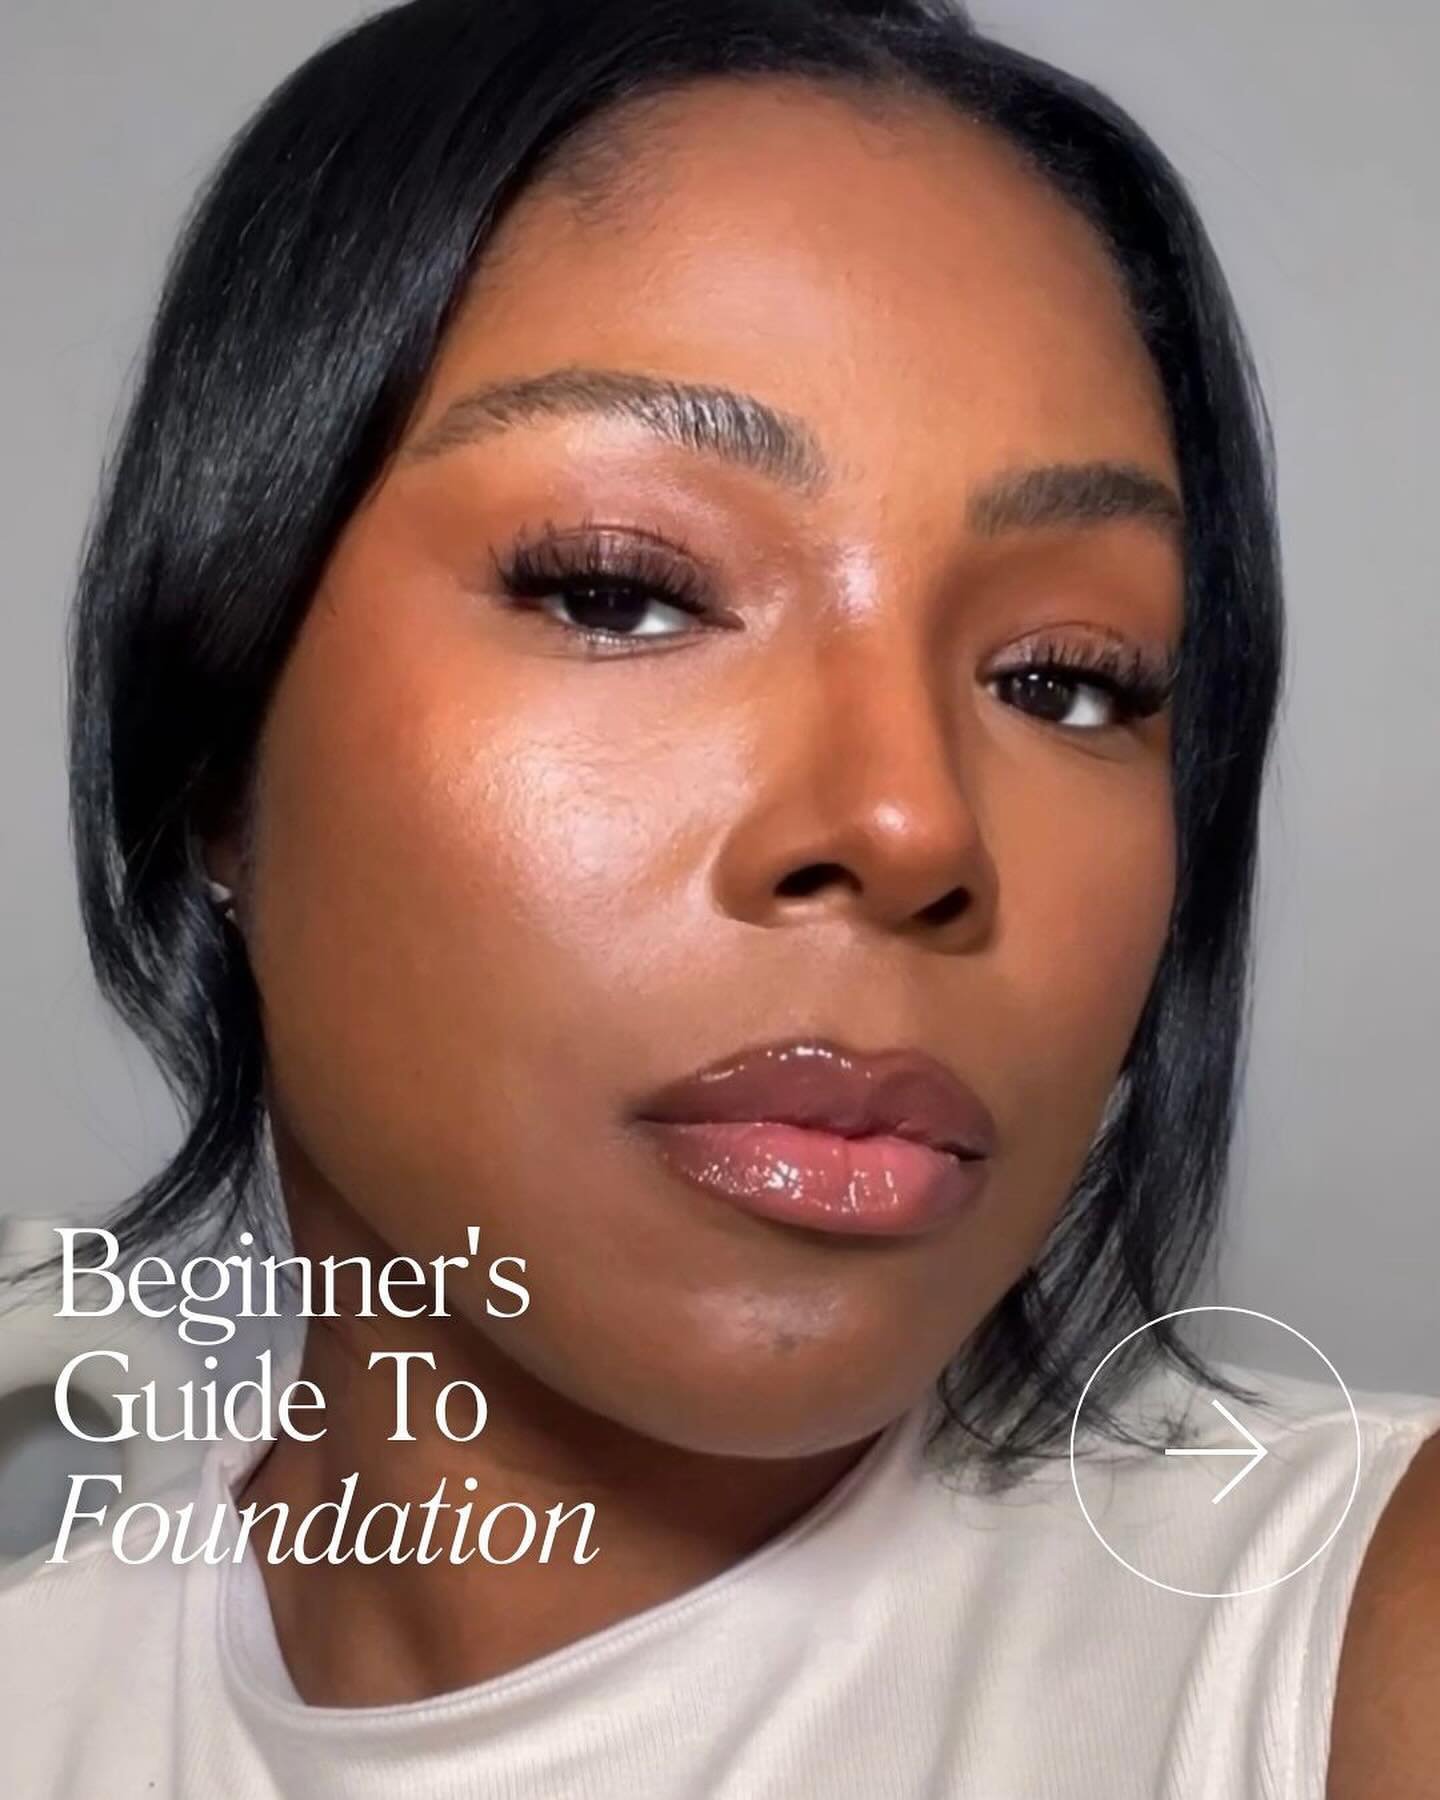 A beginner&rsquo;s guide to foundation matching ...SAVE &amp; SHARE this with a friend!

Swipe thru ➡️ for some of my most requested makeup tips to help you level up your base routine &gt;&gt; how to find your undertone, foundation shopping tips, + h